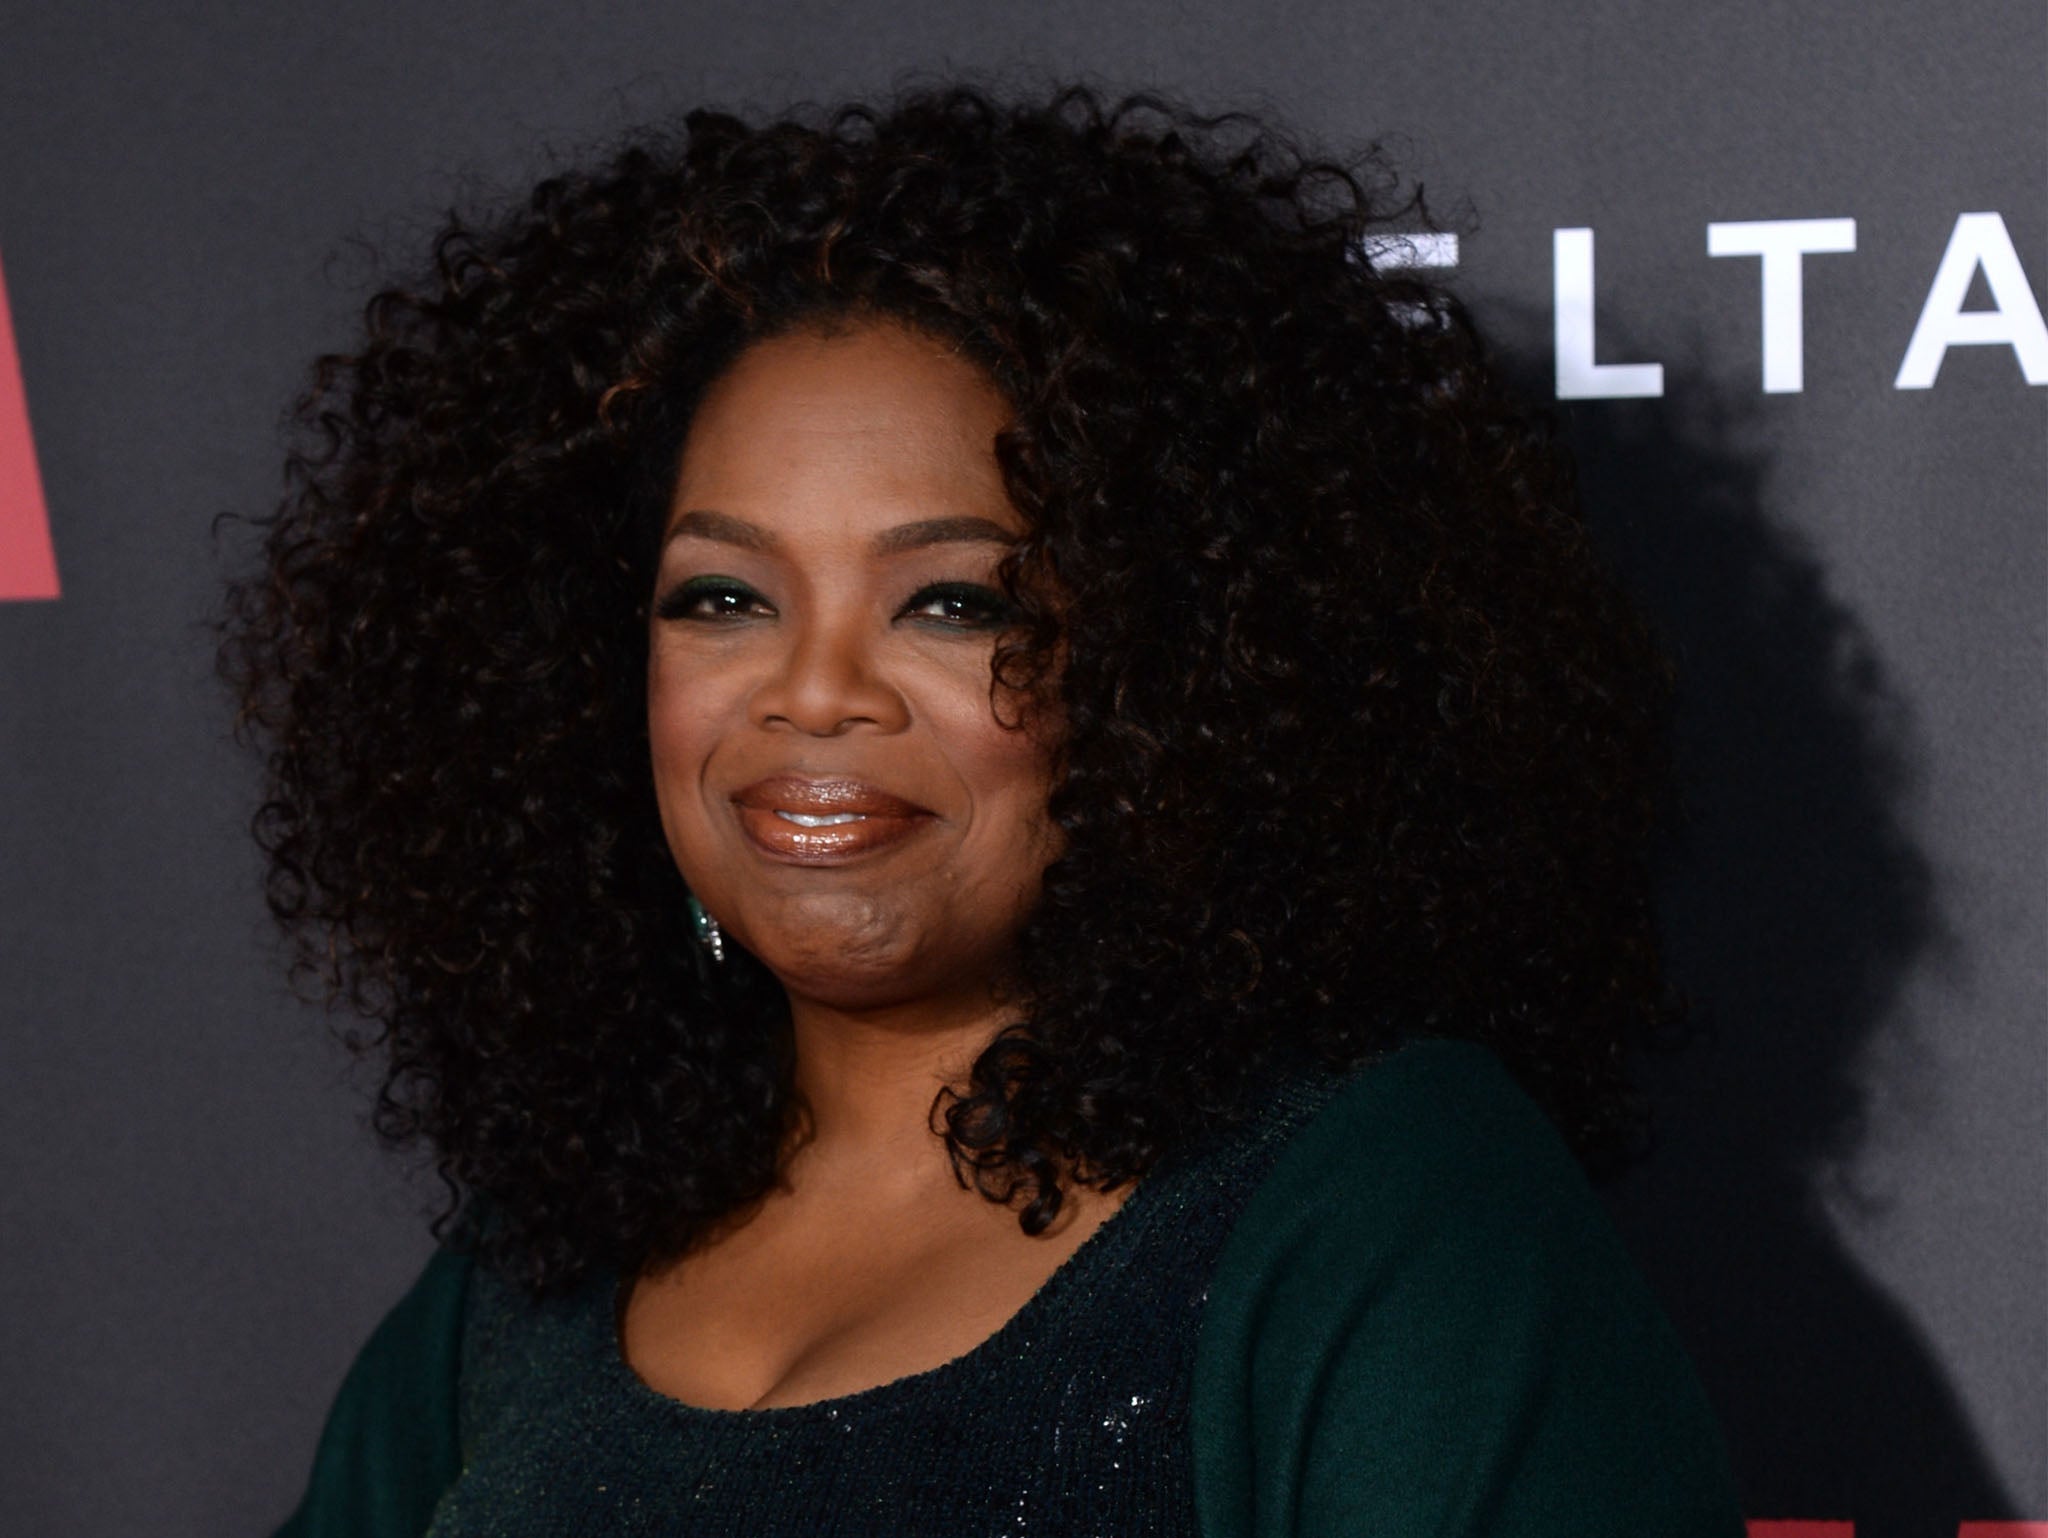 Winfrey is a significant influencer in the US and one estimate predicted that her endorsement of Mr Obama between 2006 and 2008 delivered over a million votes in the 2008 Democratic primary race